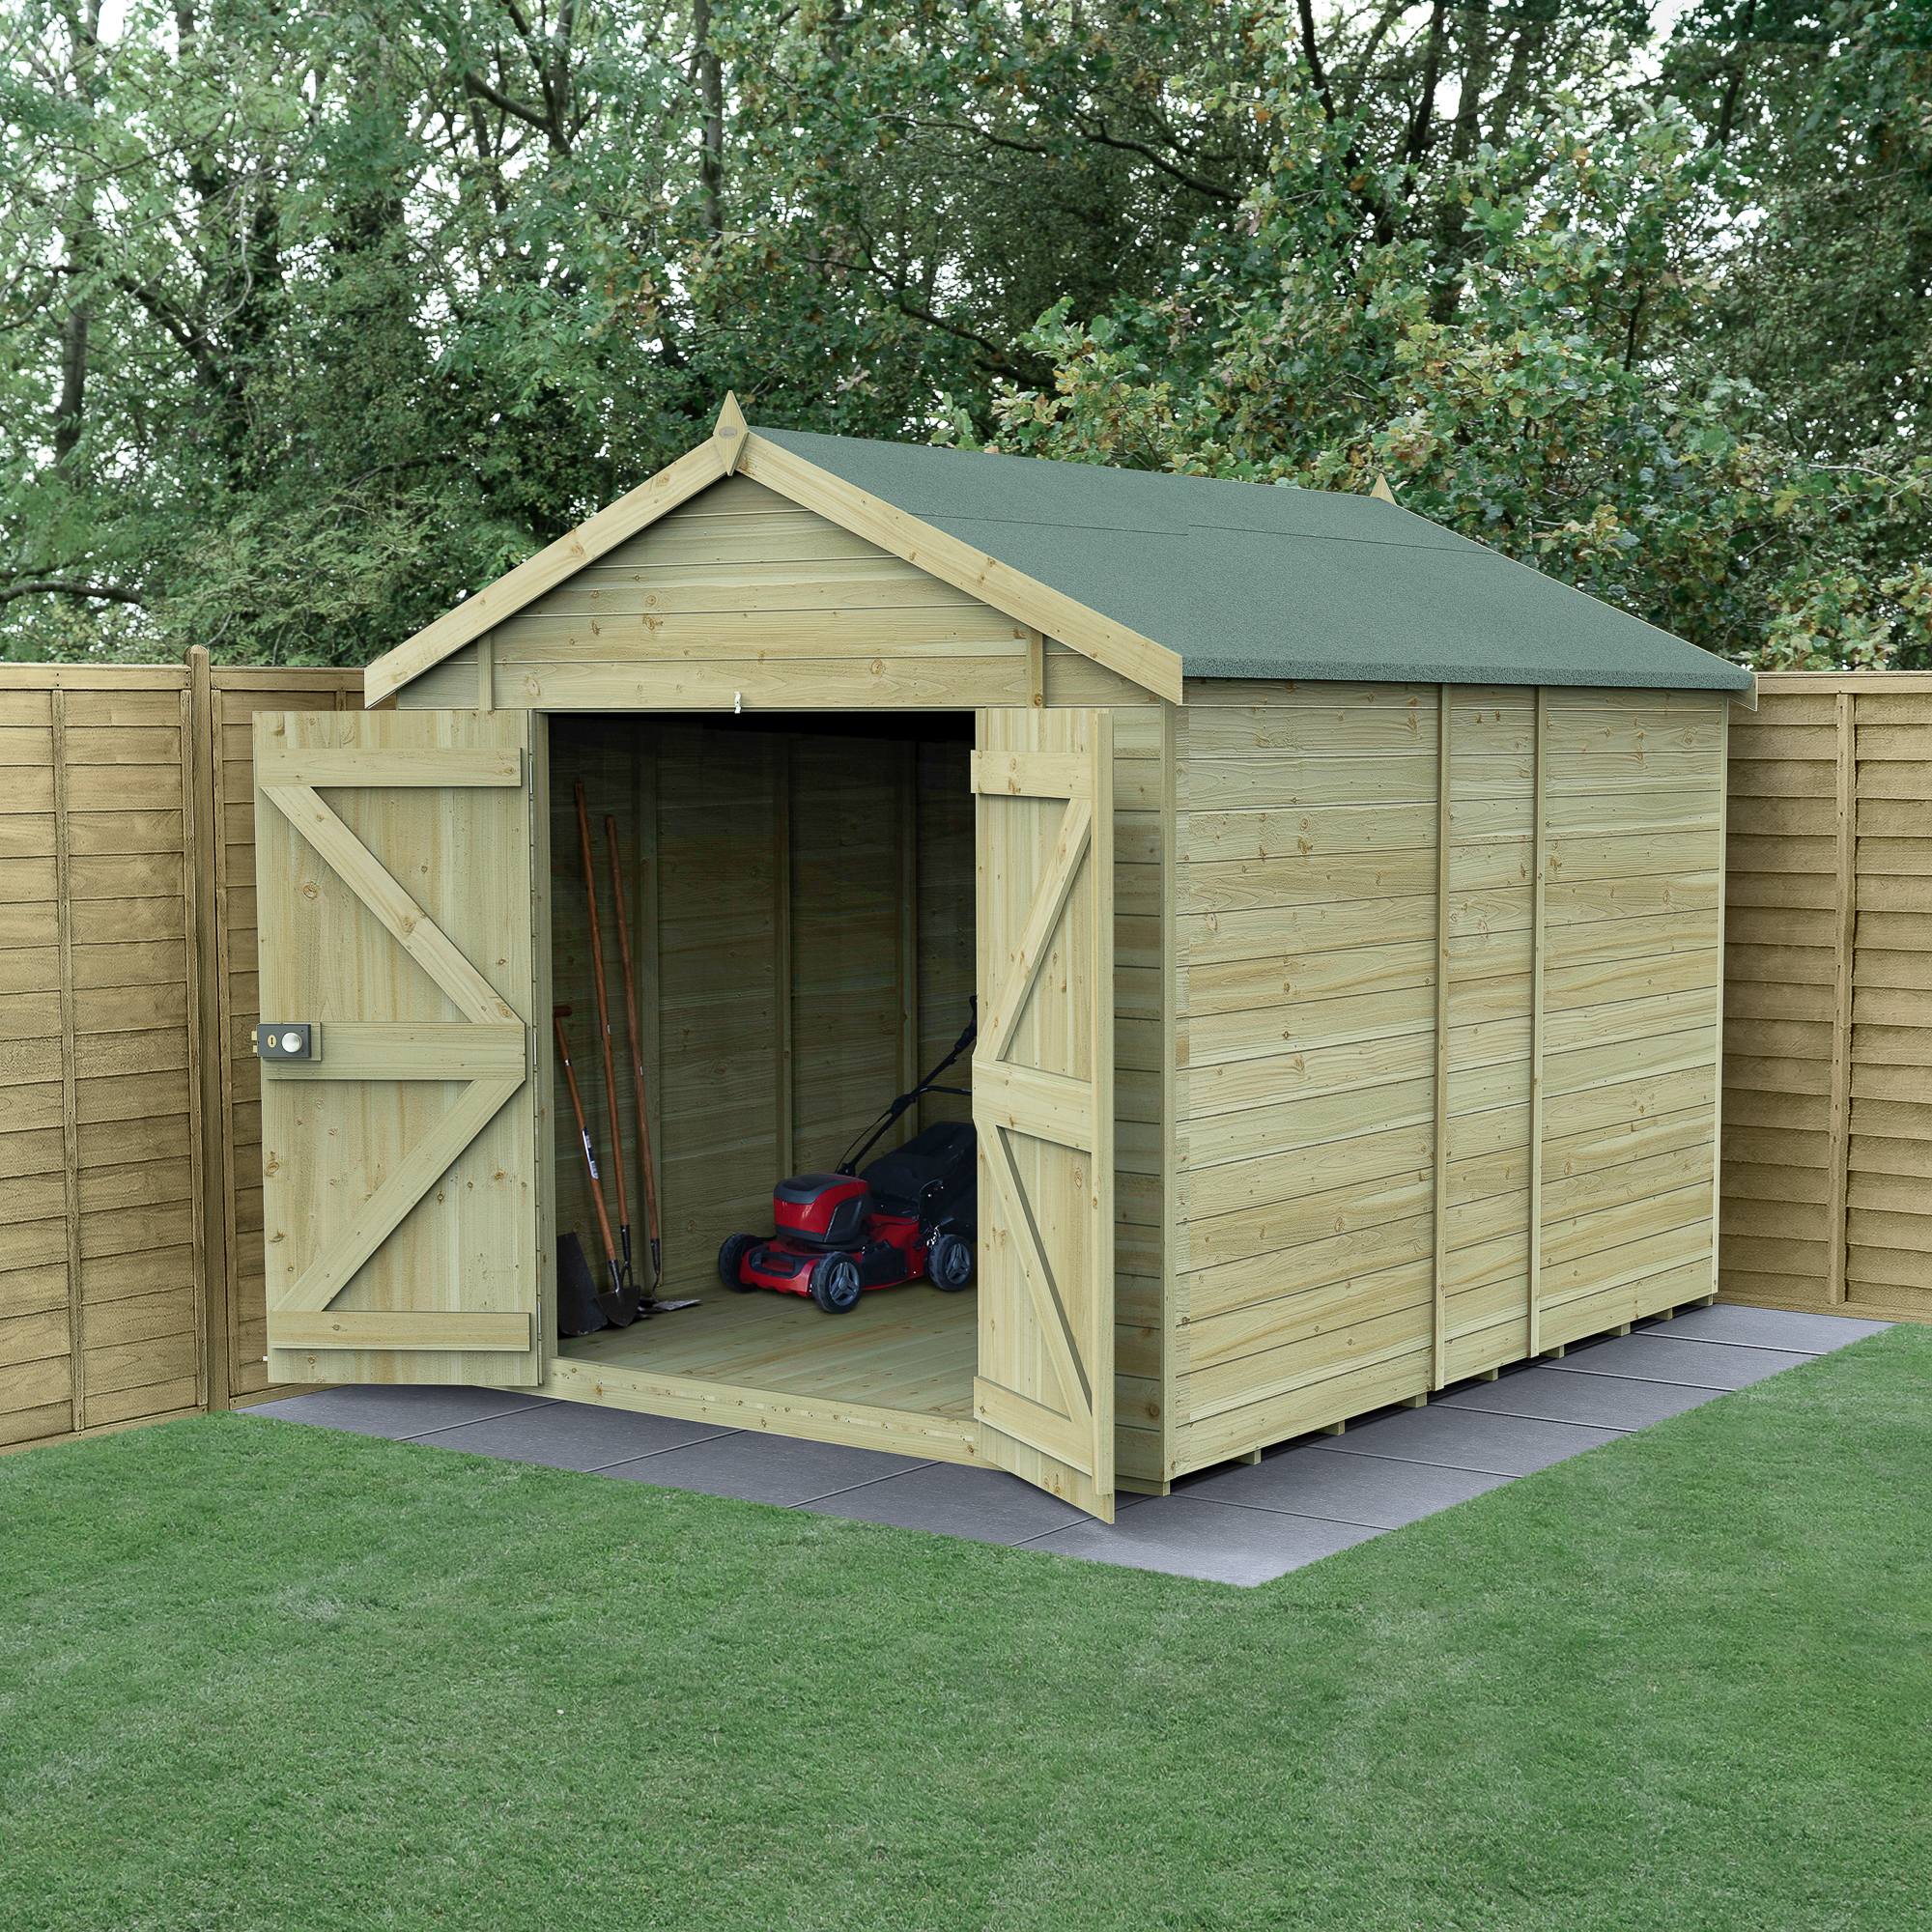 Forest Garden Timberdale 8 x 10ft Apex Tongue & Groove Pressure Treated Double Door Windowless Shed